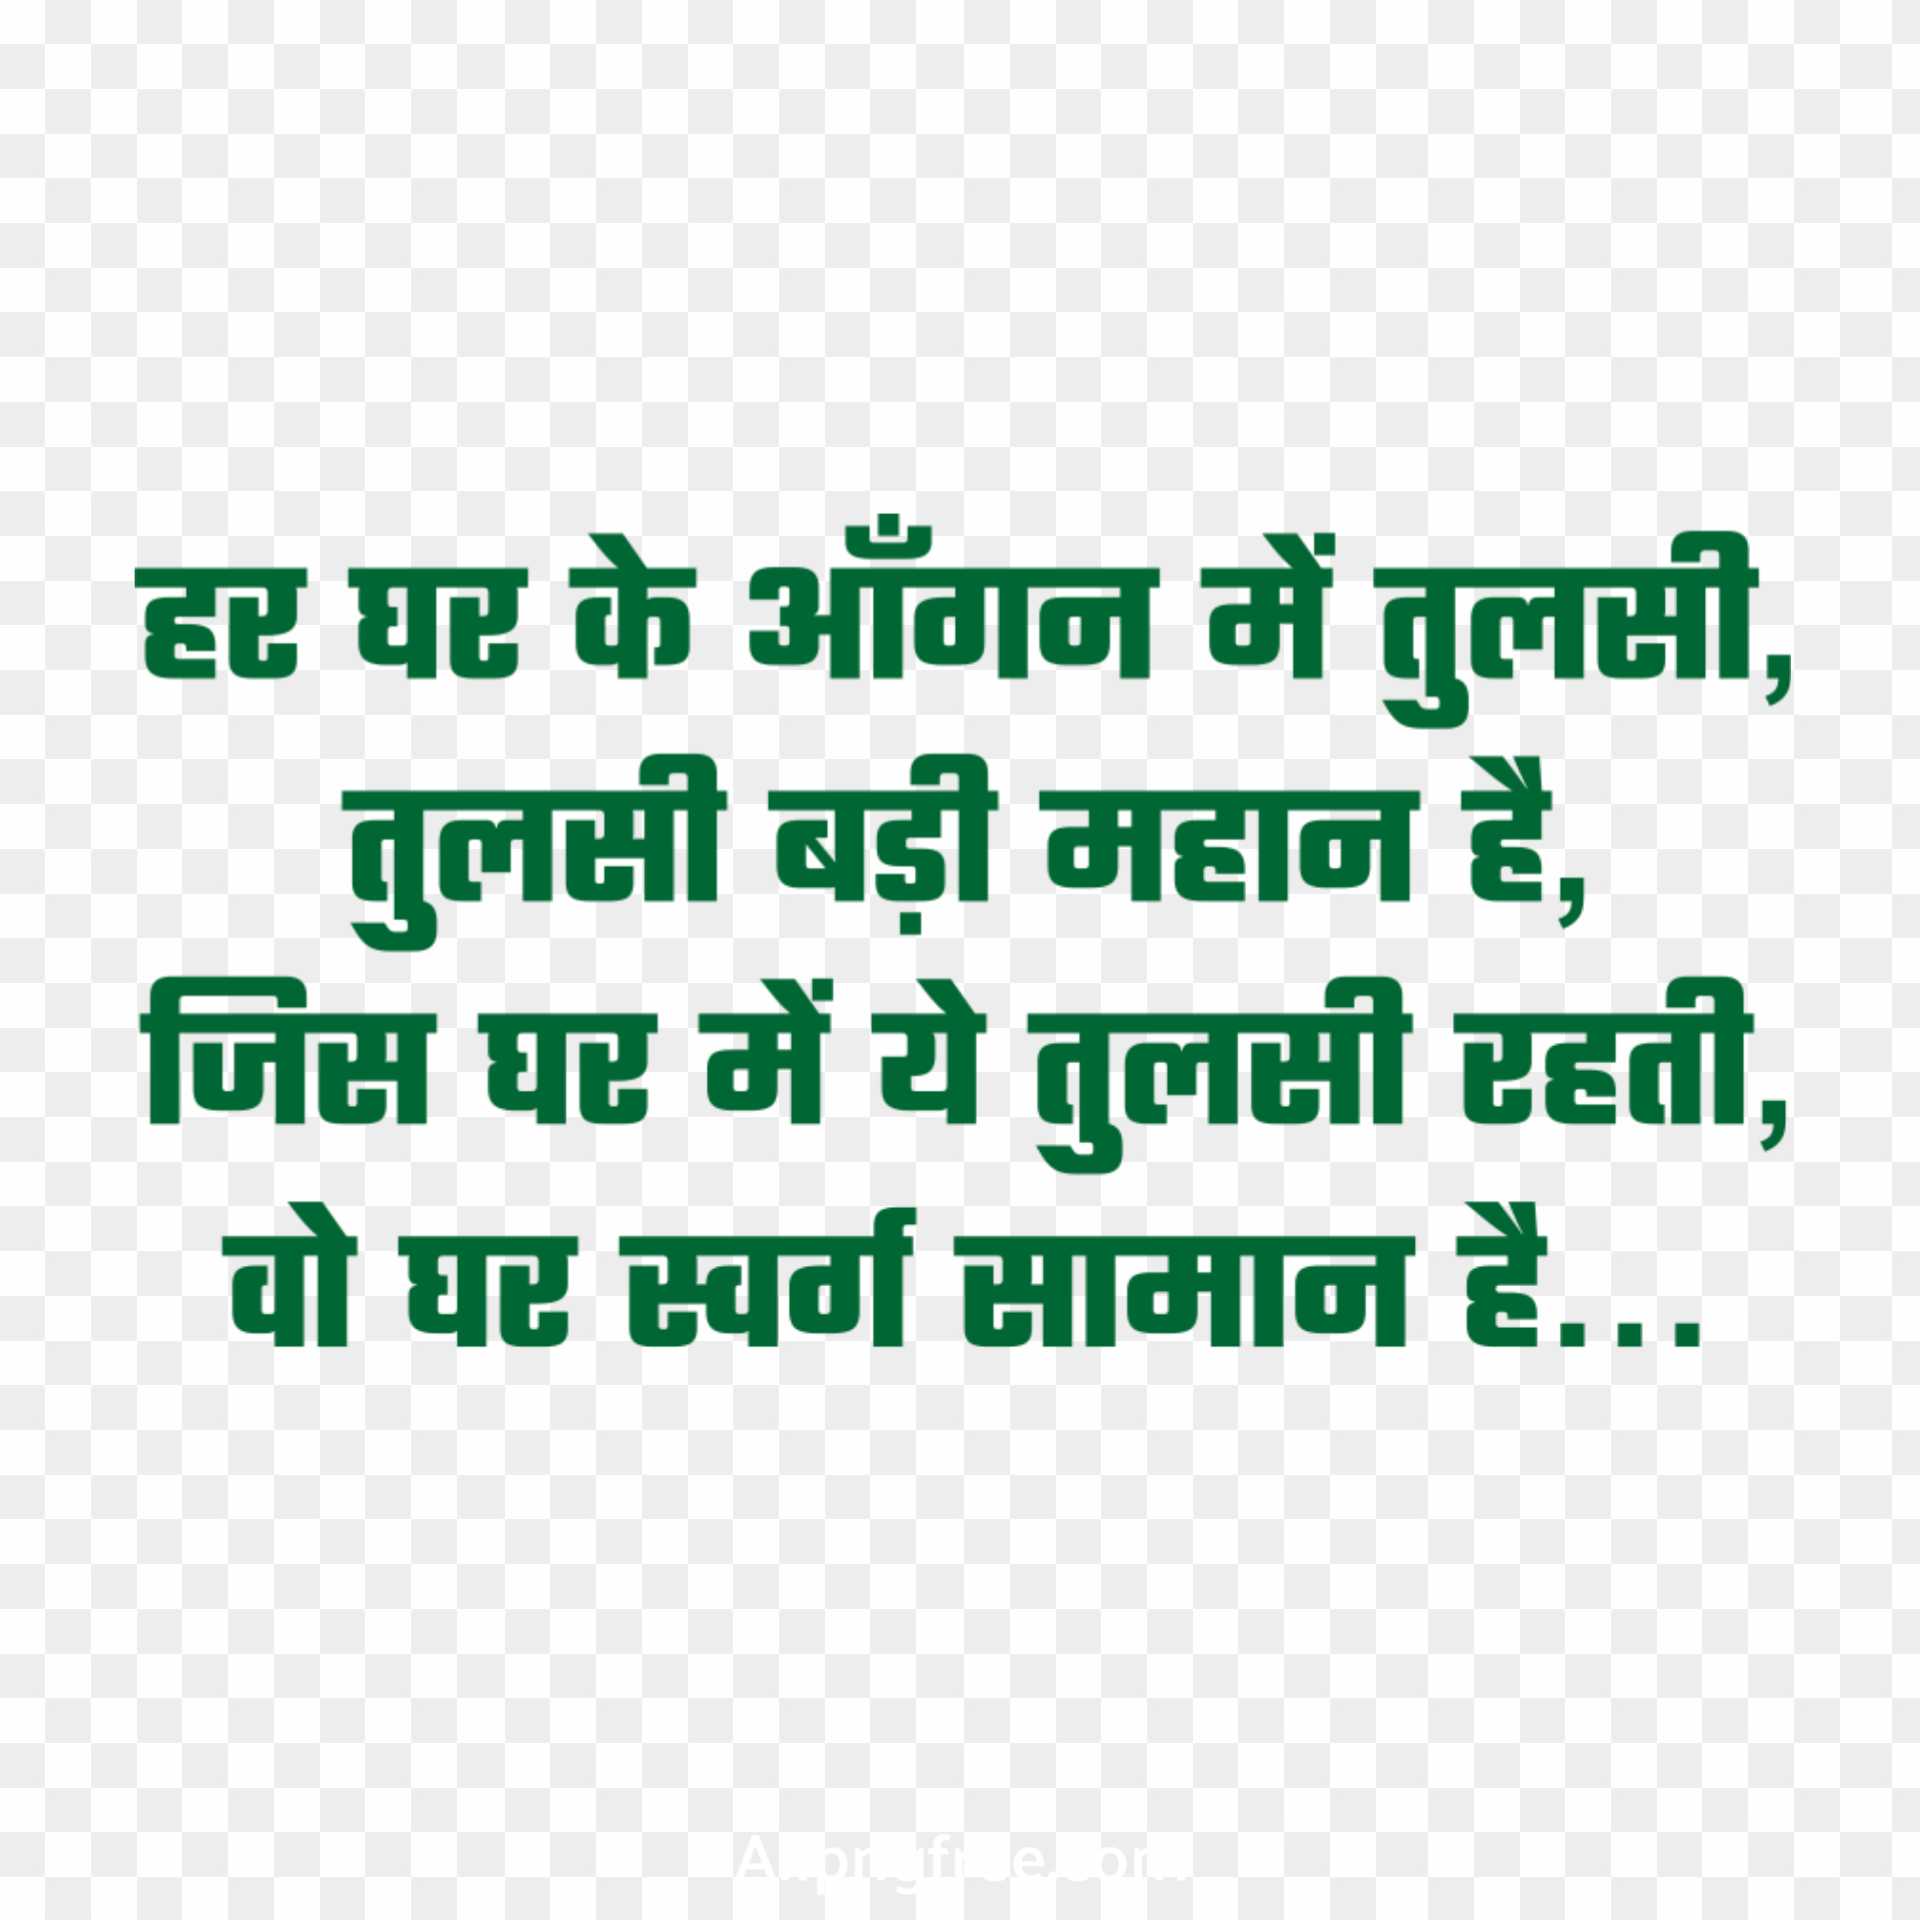 Tulsi quotes in Hindi images 